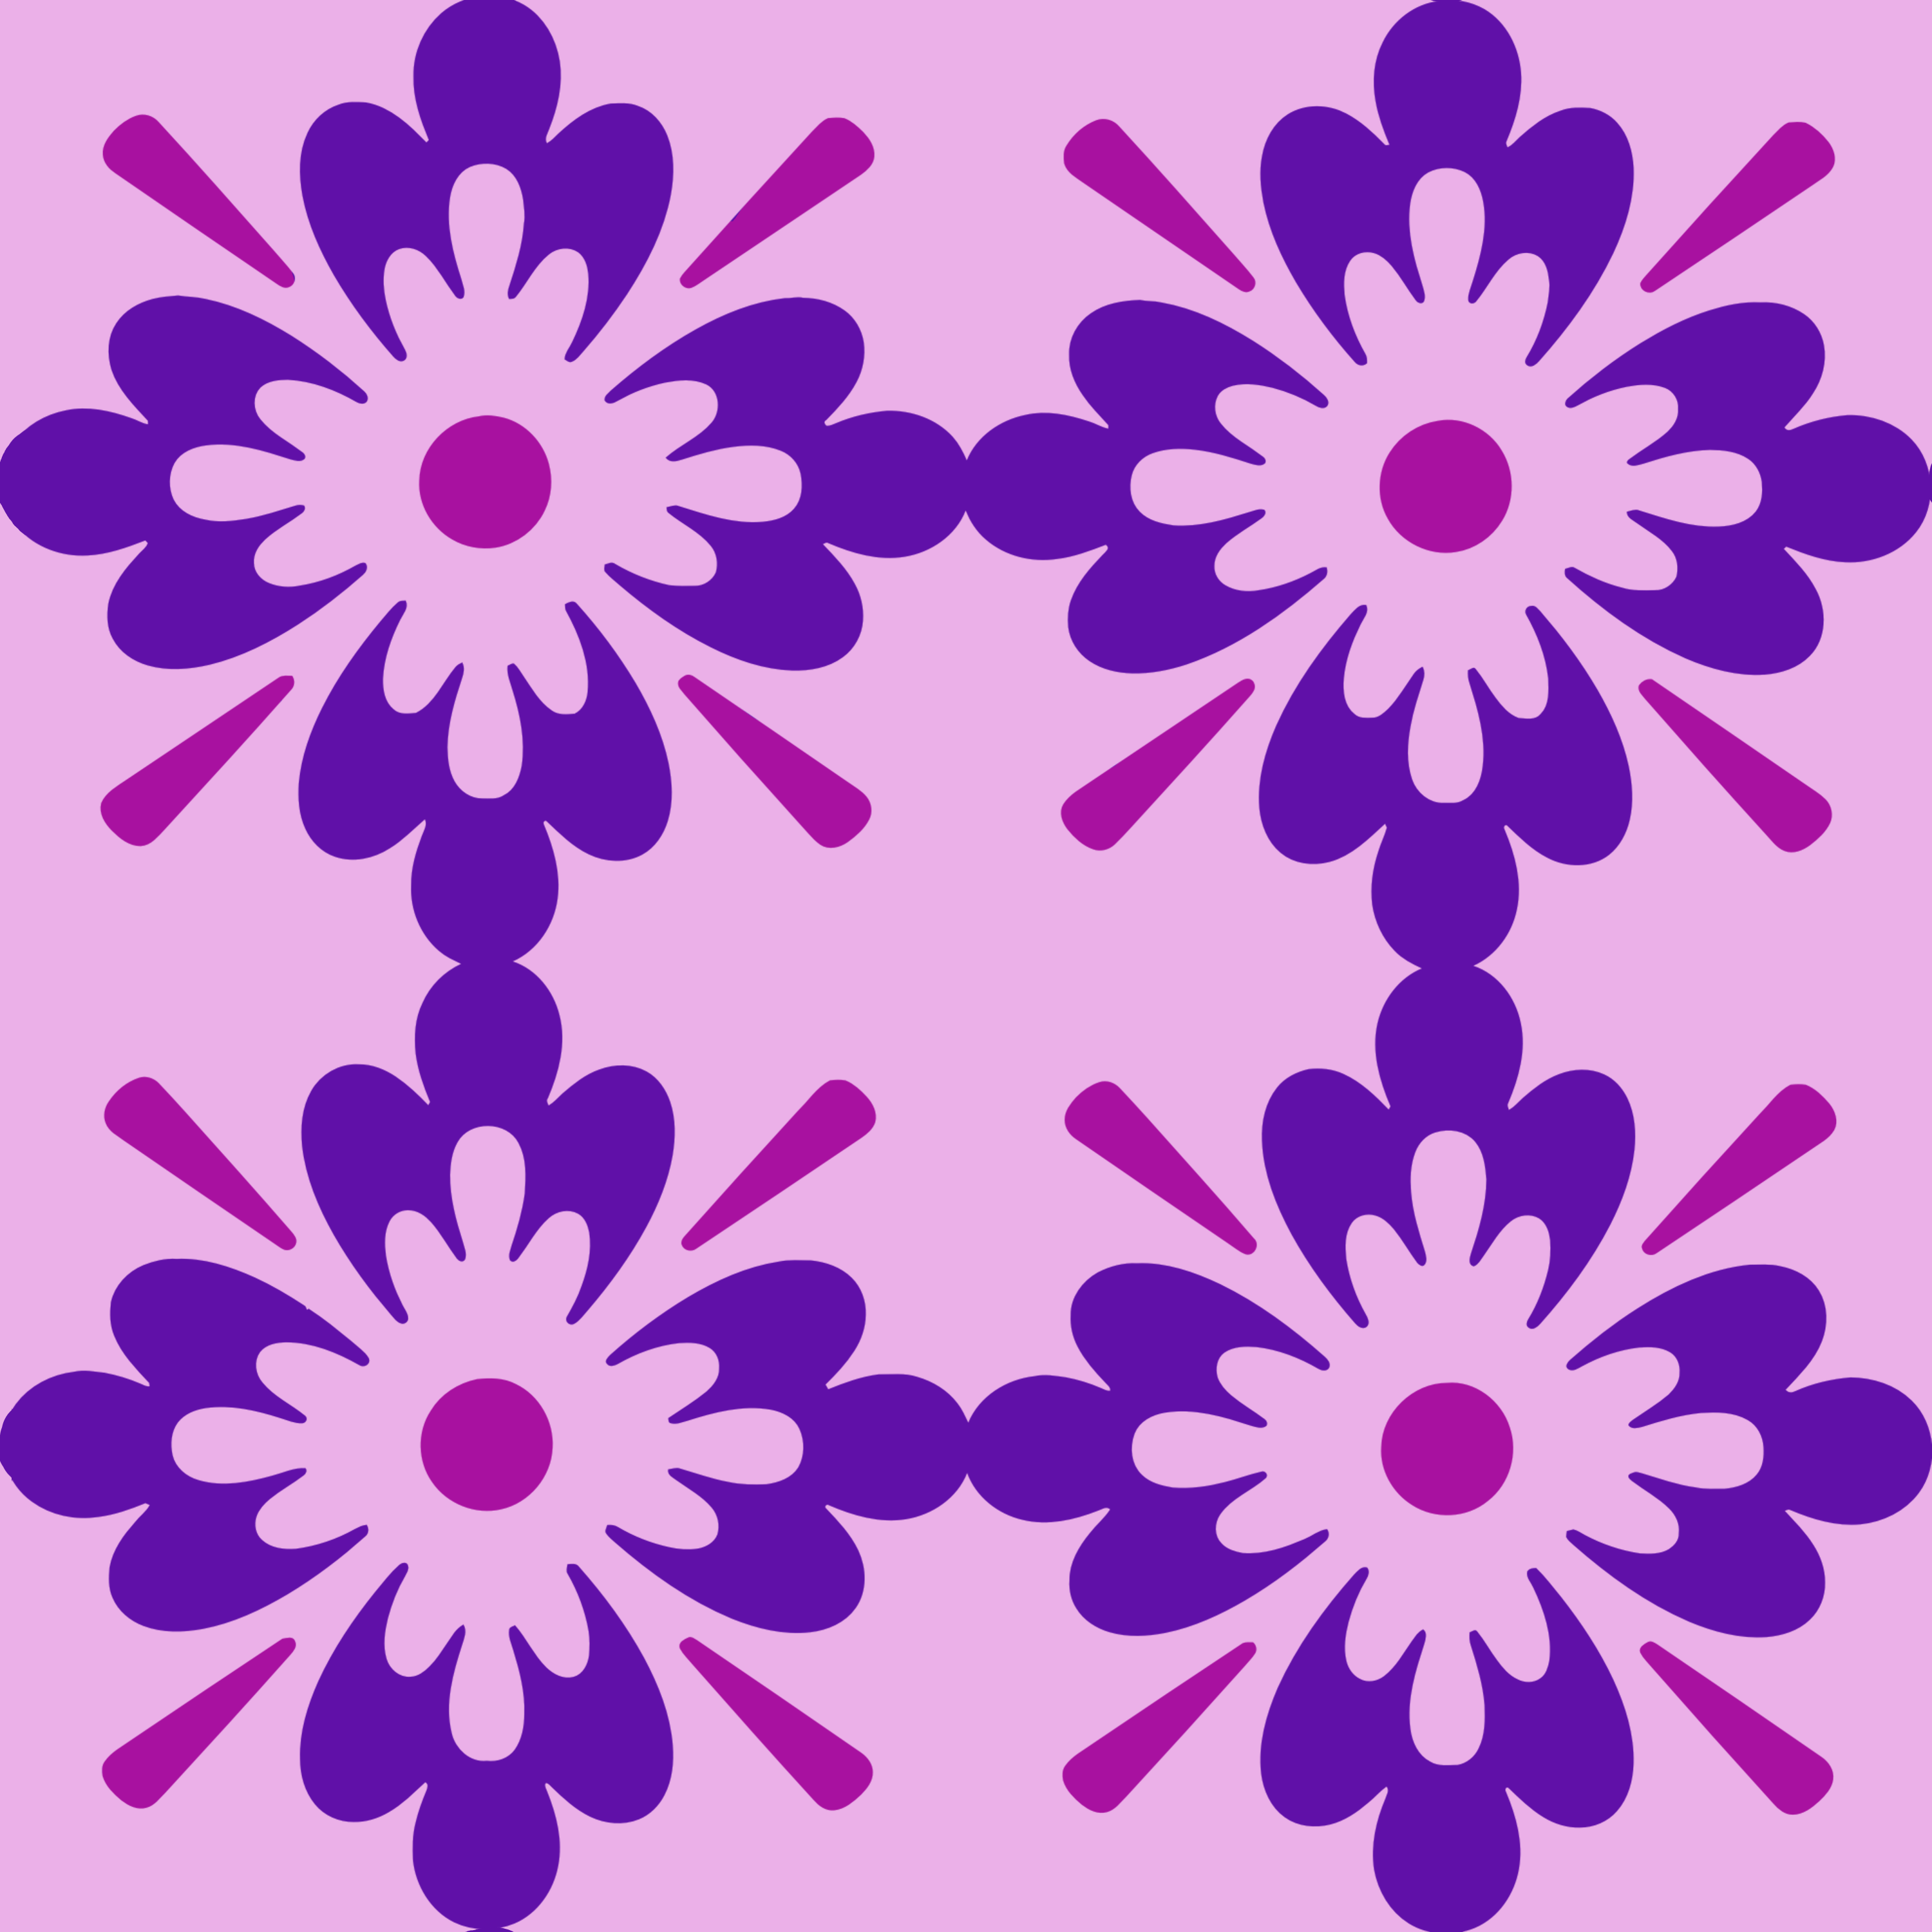 A seamless textile design featuring pink and purple flowers with intricate details and delicate petals. The design is perfect for a variety of uses, including clothing, bedding, and home decor.